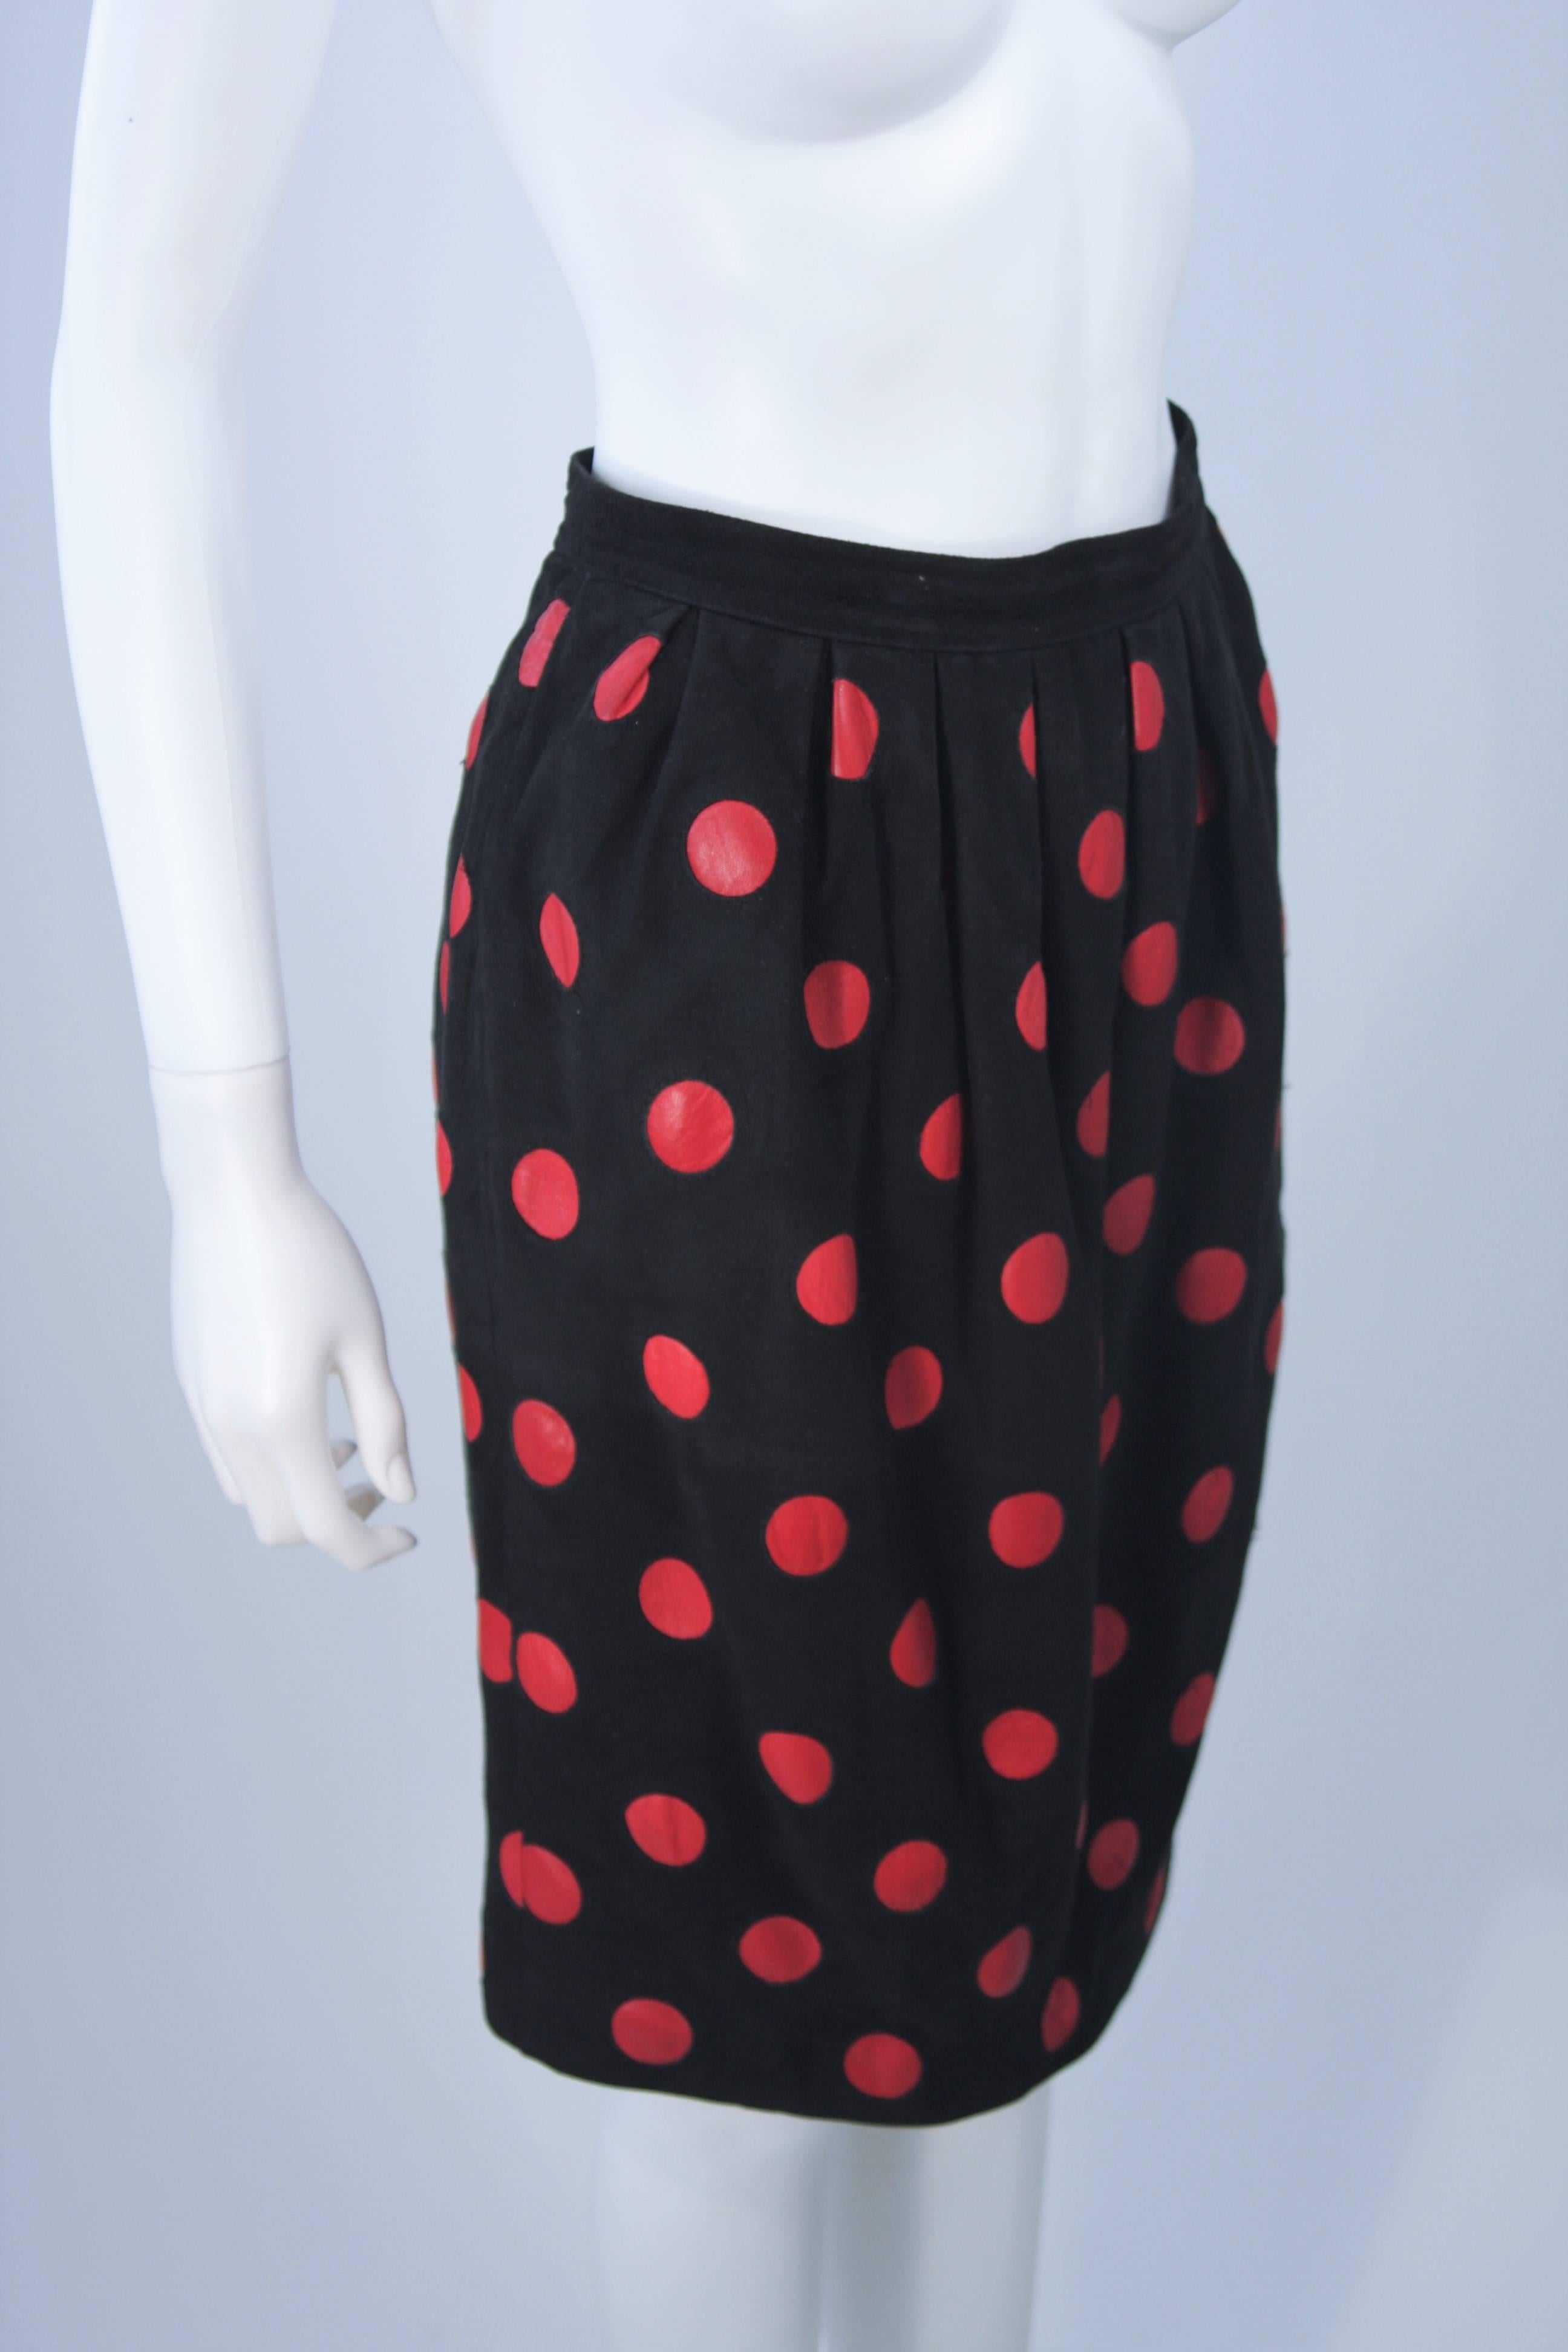 VALENTINO Black Suede Skirt with Red Leather Polka Dots Size 4-6 For Sale 1